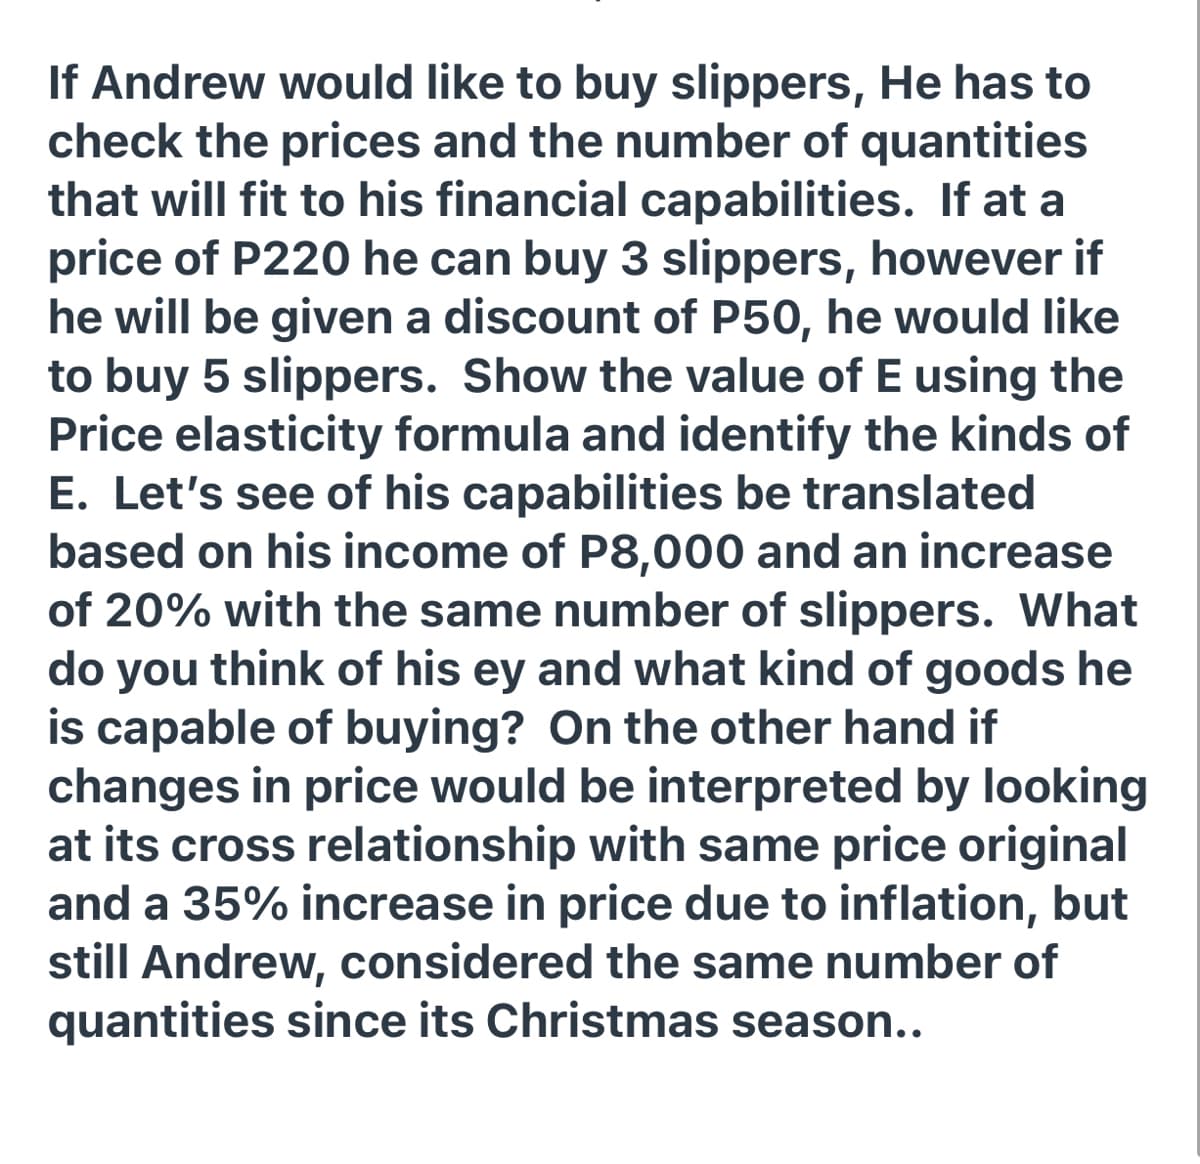 If Andrew would like to buy slippers, He has to
check the prices and the number of quantities
that will fit to his financial capabilities. If at a
price of P220 he can buy 3 slippers, however if
he will be given a discount of P50, he would like
to buy 5 slippers. Show the value of E using the
Price elasticity formula and identify the kinds of
E. Let's see of his capabilities be translated
based on his income of P8,000 and an increase
of 20% with the same number of slippers. What
do you
think of his ey and what kind of goods he
is capable of buying? On the other hand if
changes in price would be interpreted by looking
at its cross relationship with same price original
and a 35% increase in price due to inflation, but
still Andrew, considered the same number of
quantities since its Christmas season..
